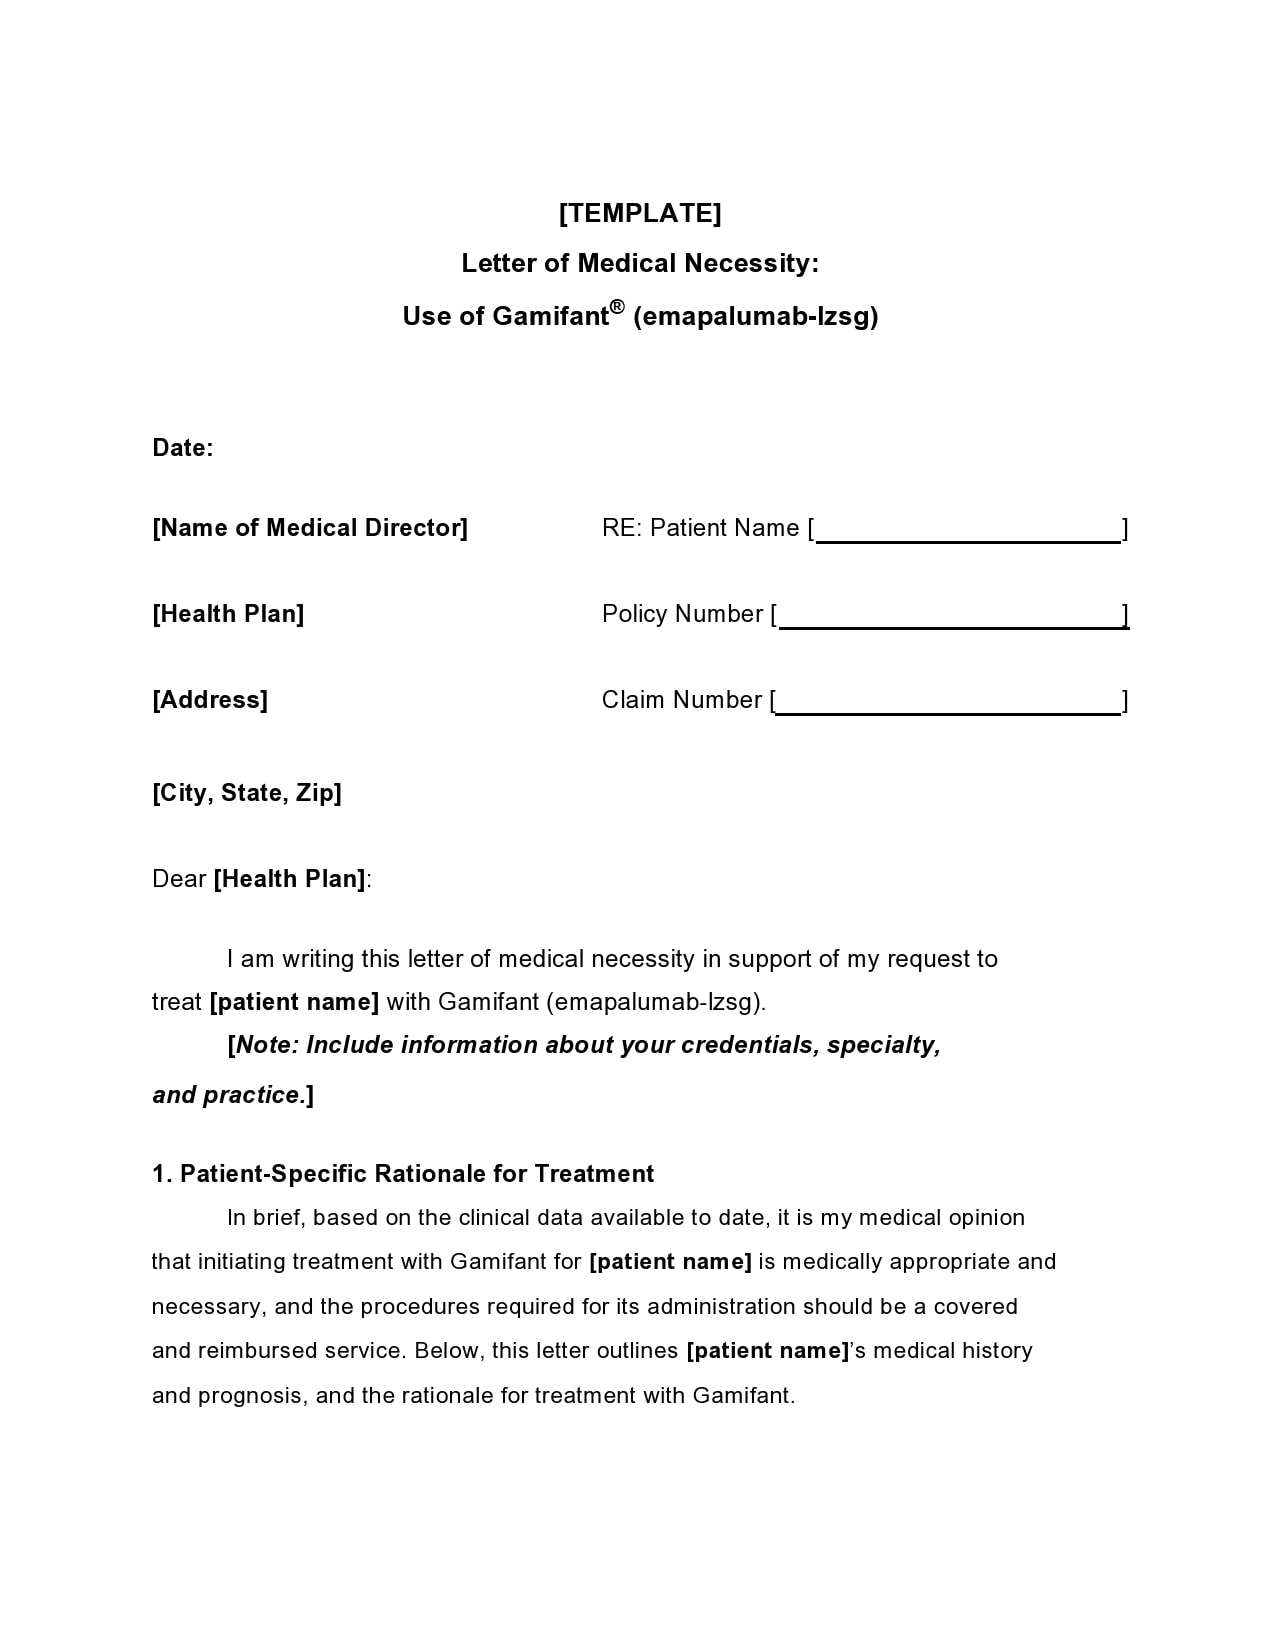 40 Best Letter Of Medical Necessity Templates And Examples 6938